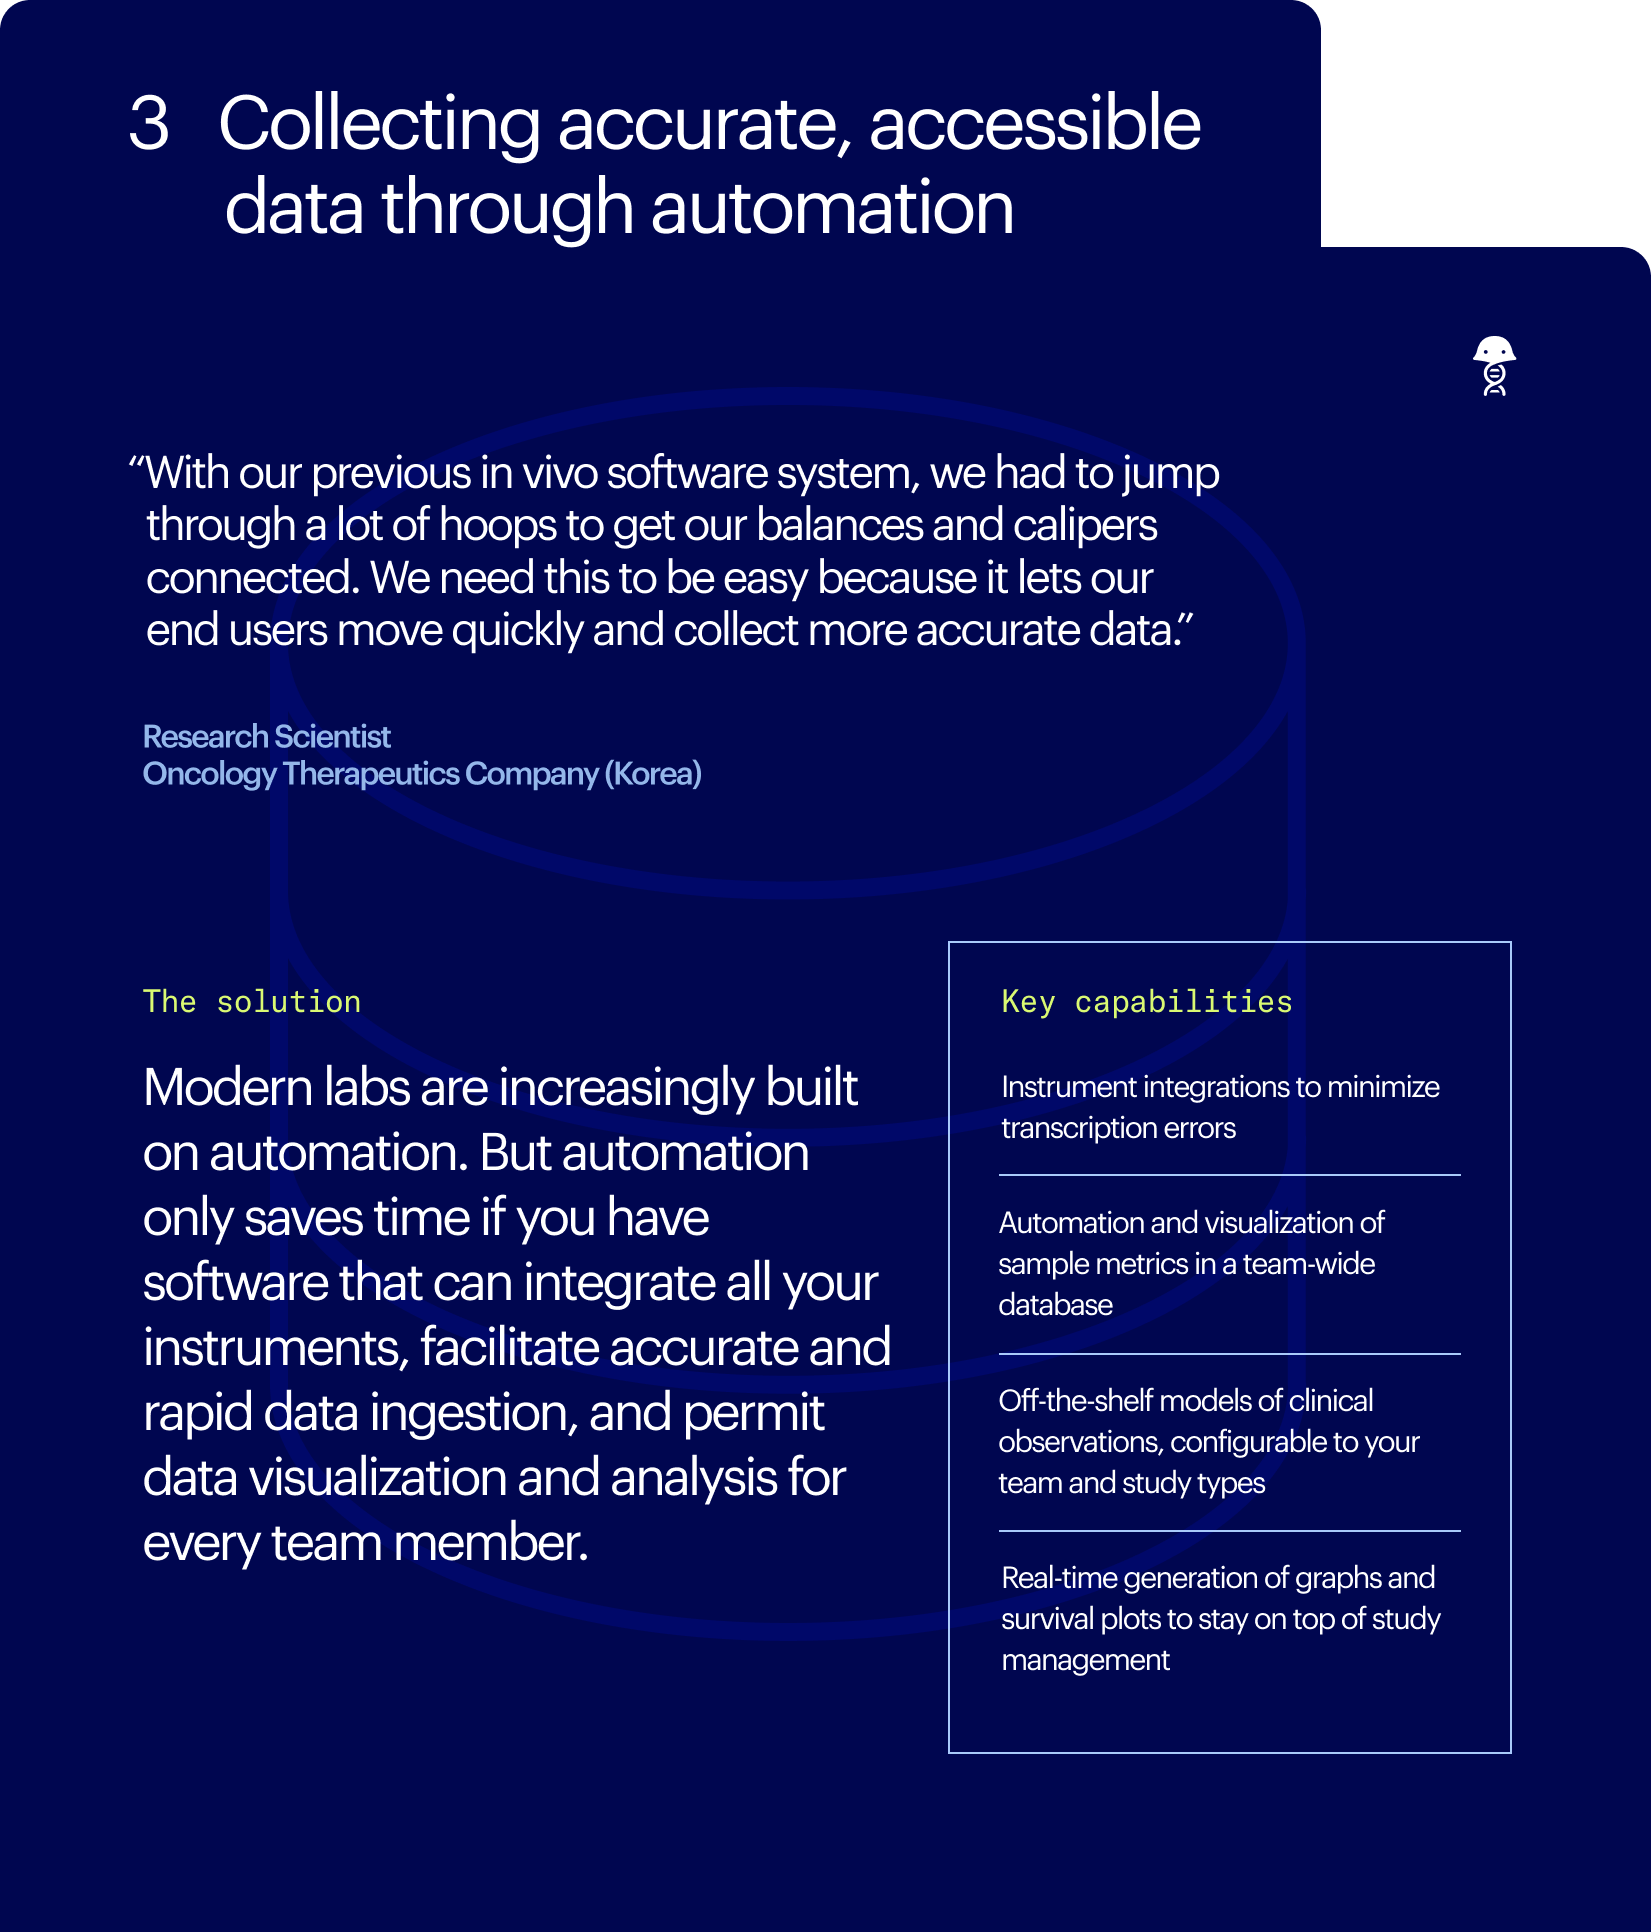 studies-infographic-3-collecting-accurate-accessible-data-through-automation